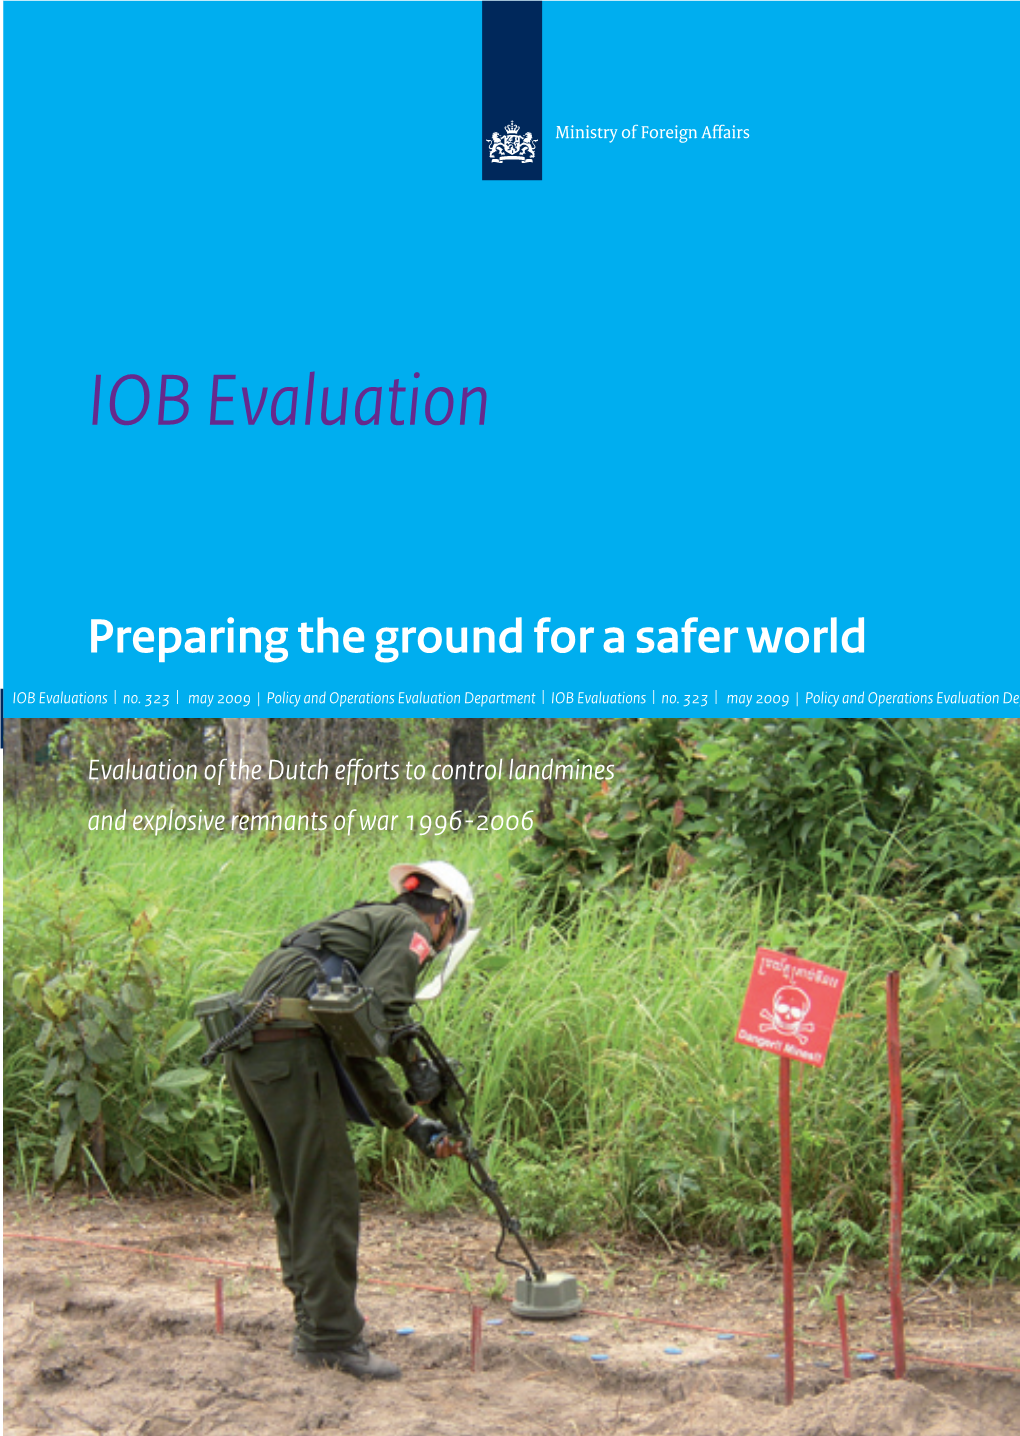 Evaluation of the Dutch Efforts to Control Landmines and Explosive Remnants of War 1996-2006